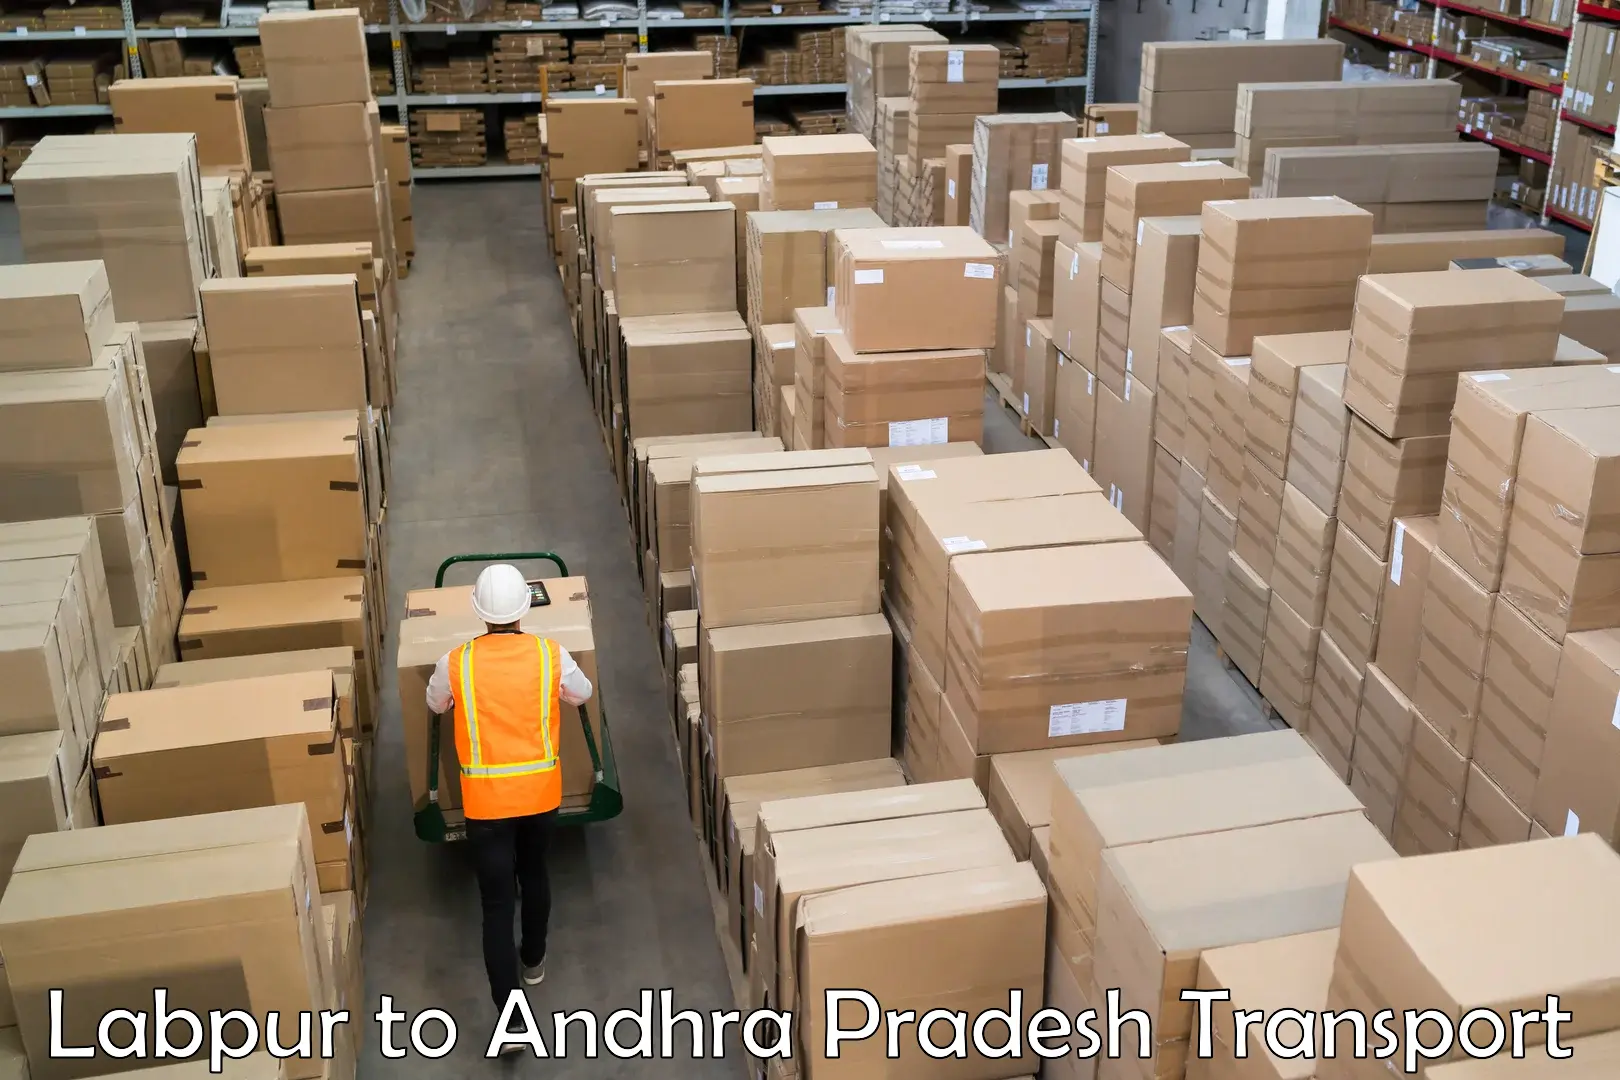 Truck transport companies in India Labpur to Nellore